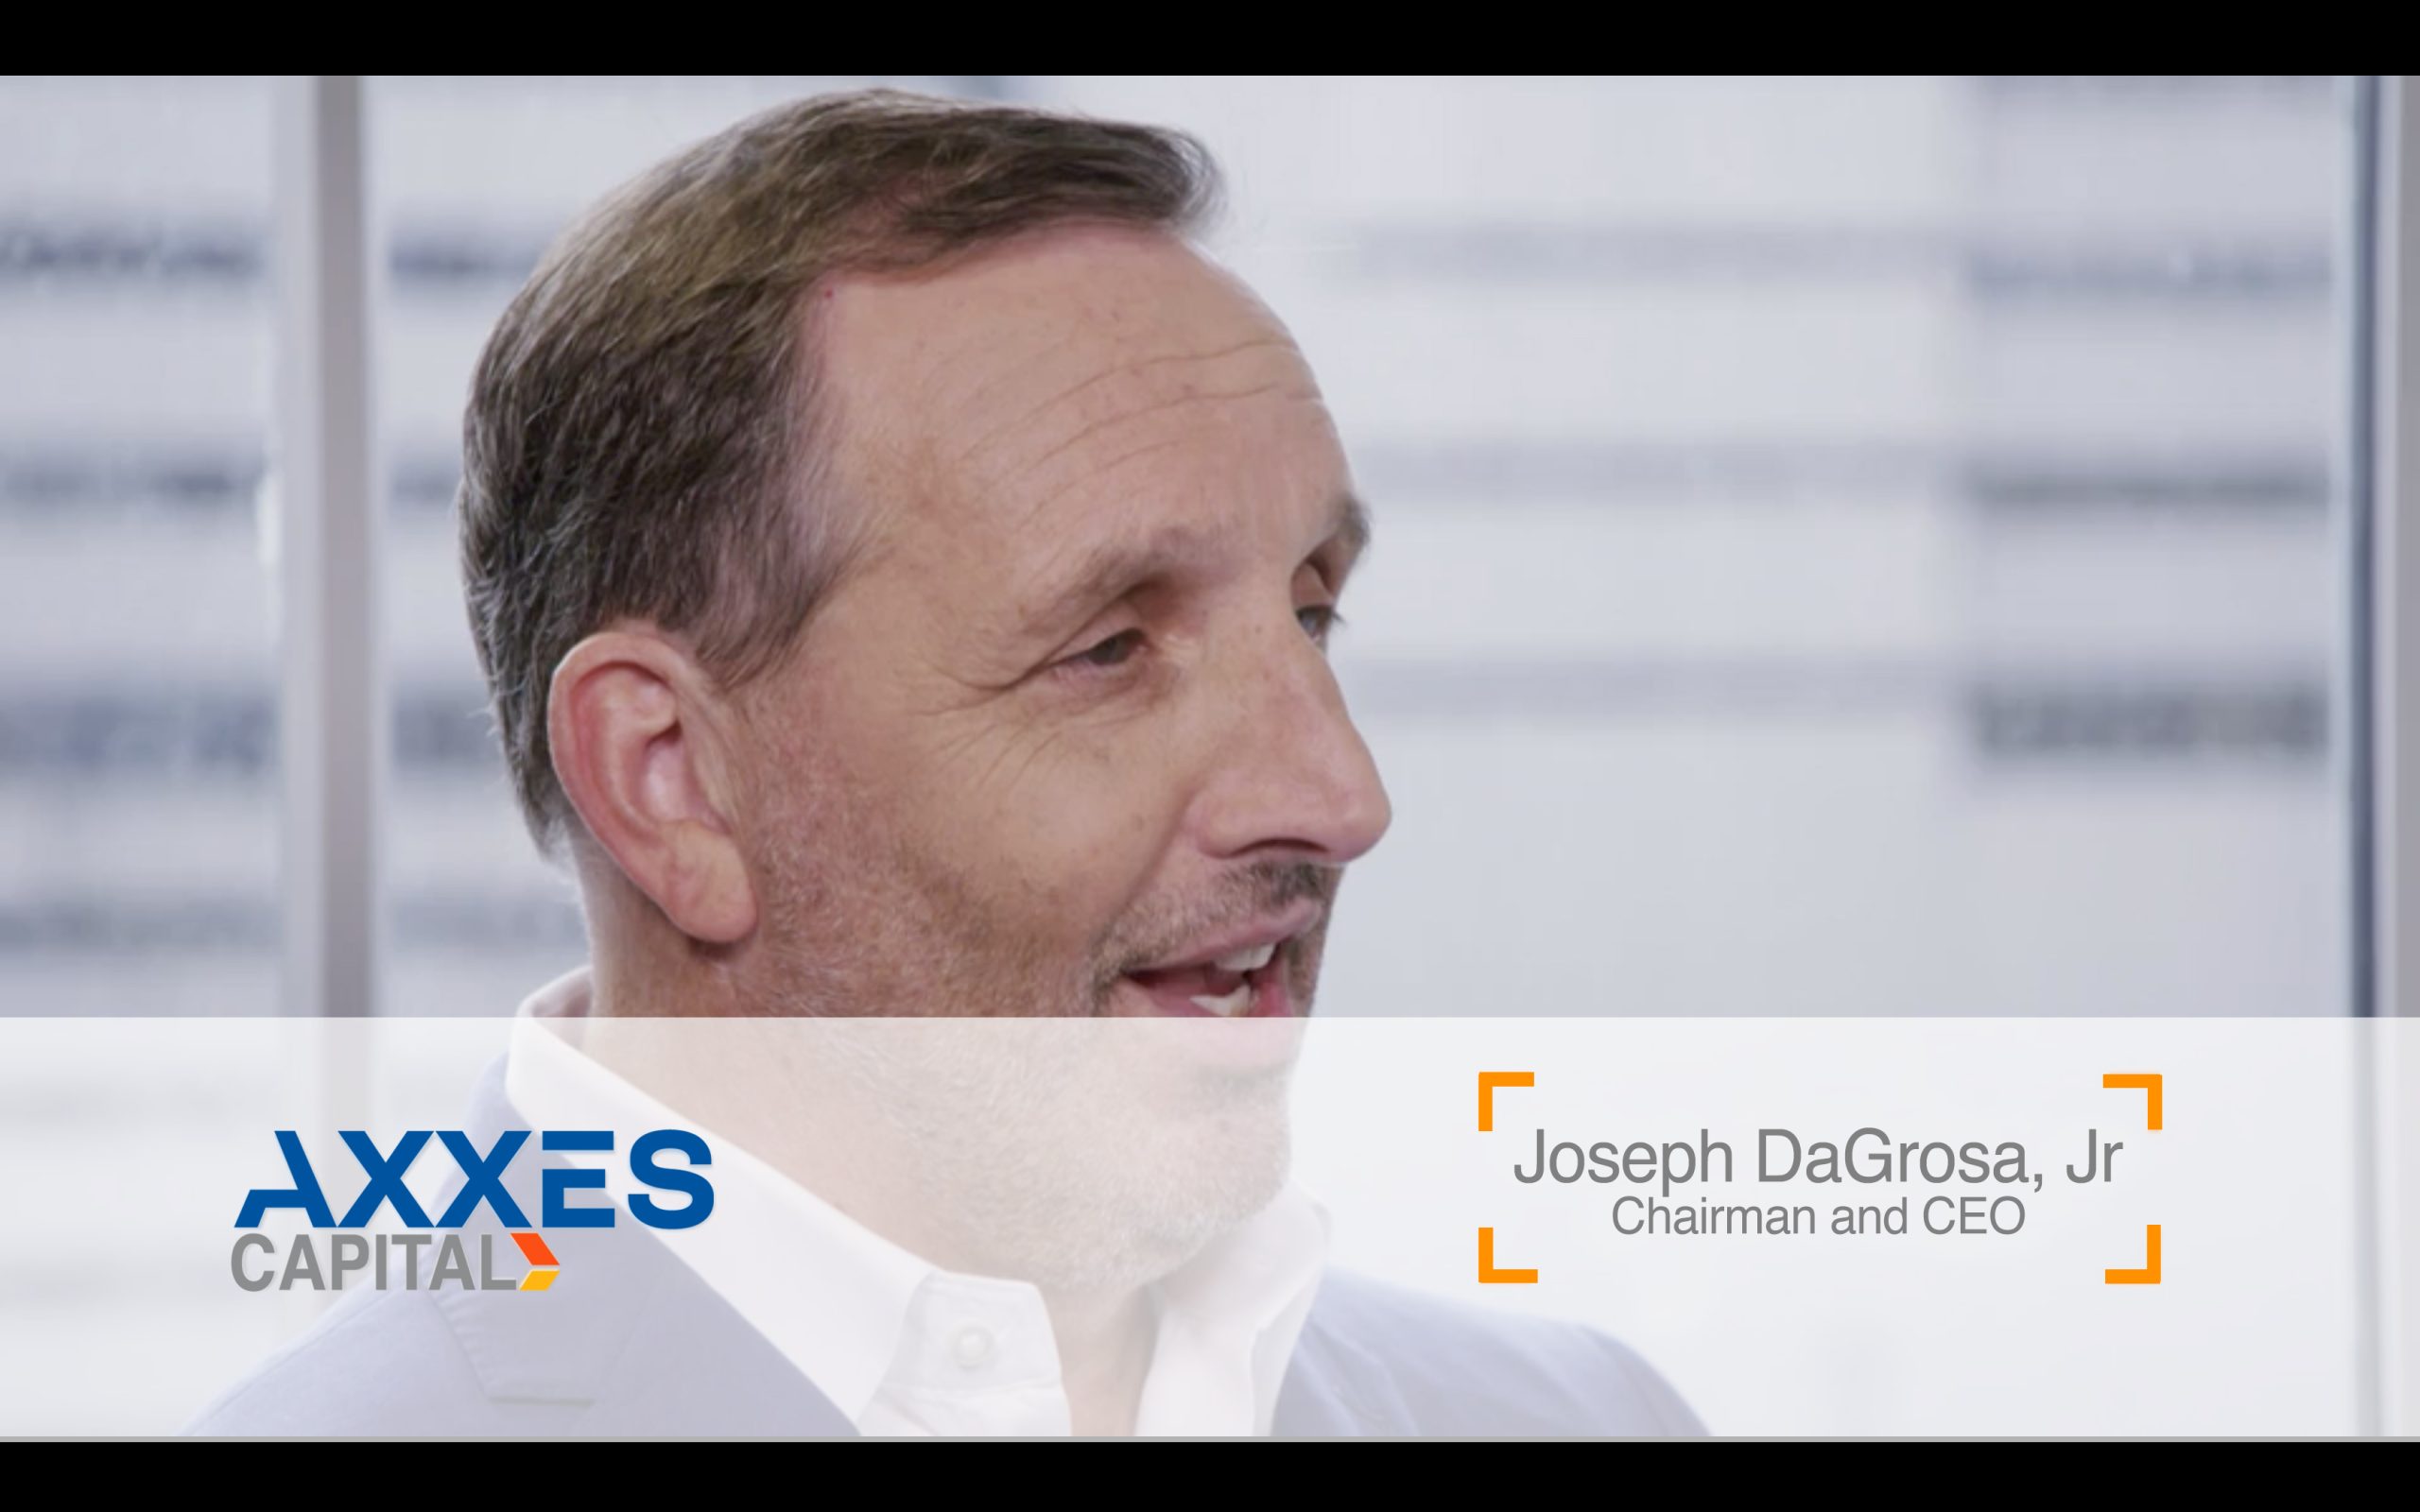 Joseph DaGrosa discusses why he started Axxes Capital